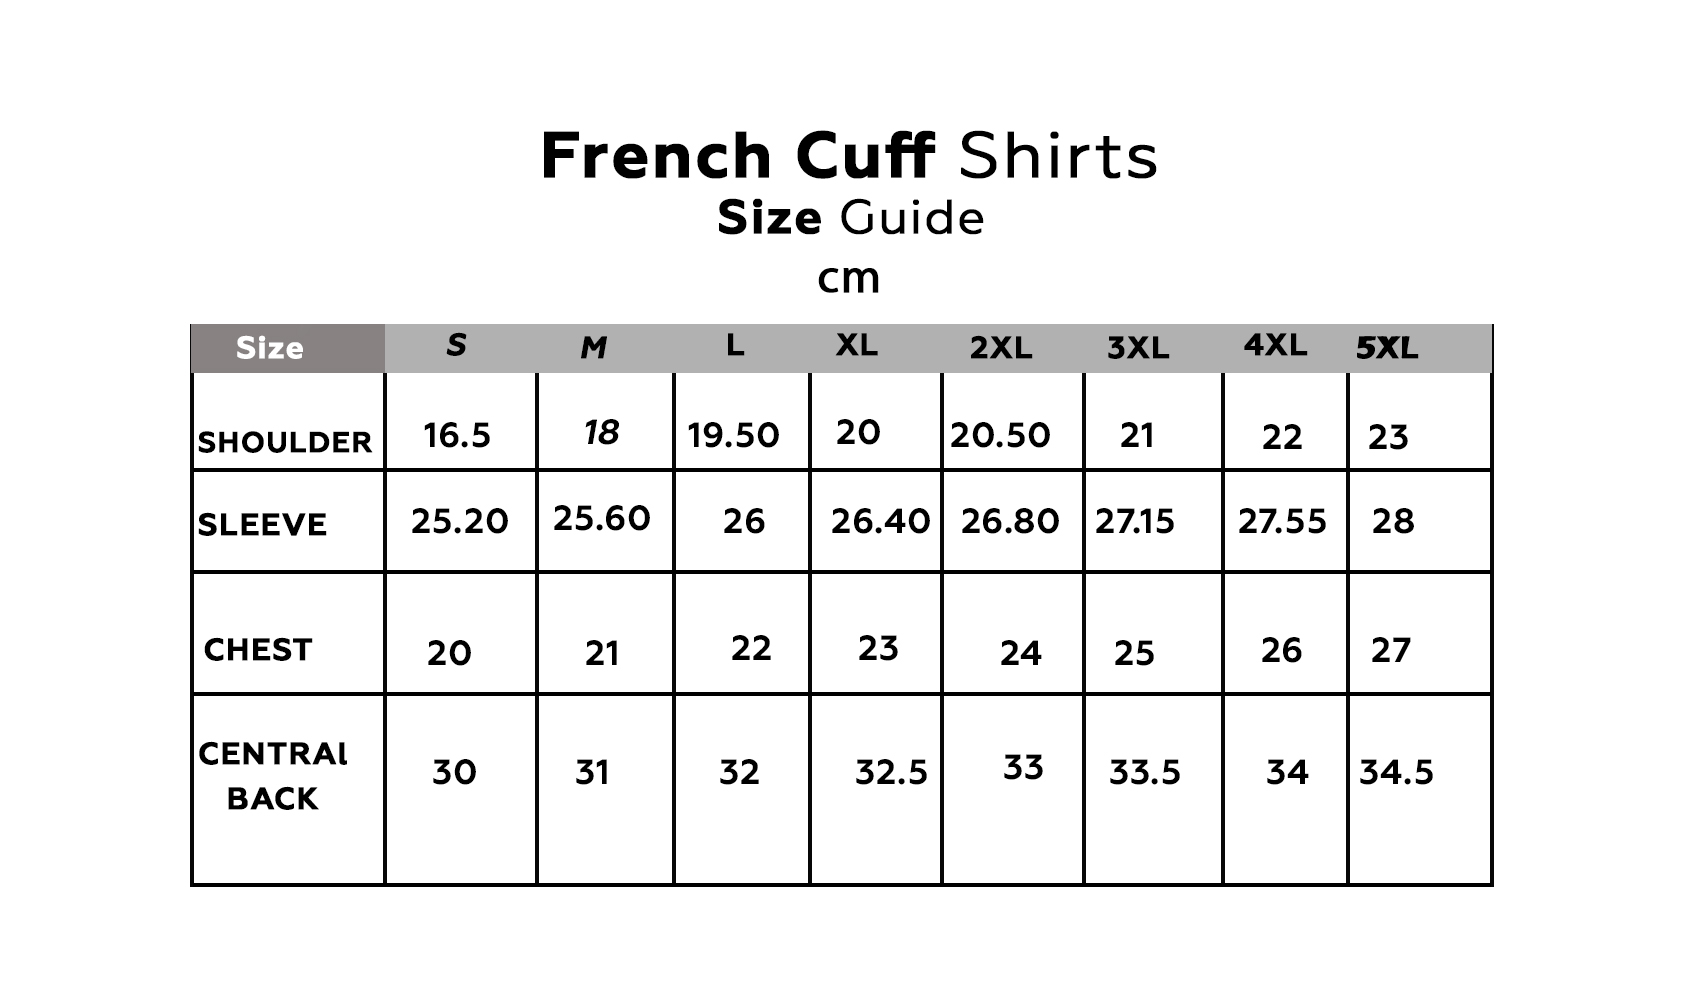 Blue Mens Slim Fit Designer French Cuff Shirt - Tailored Cotton Shirts For Work And Casual